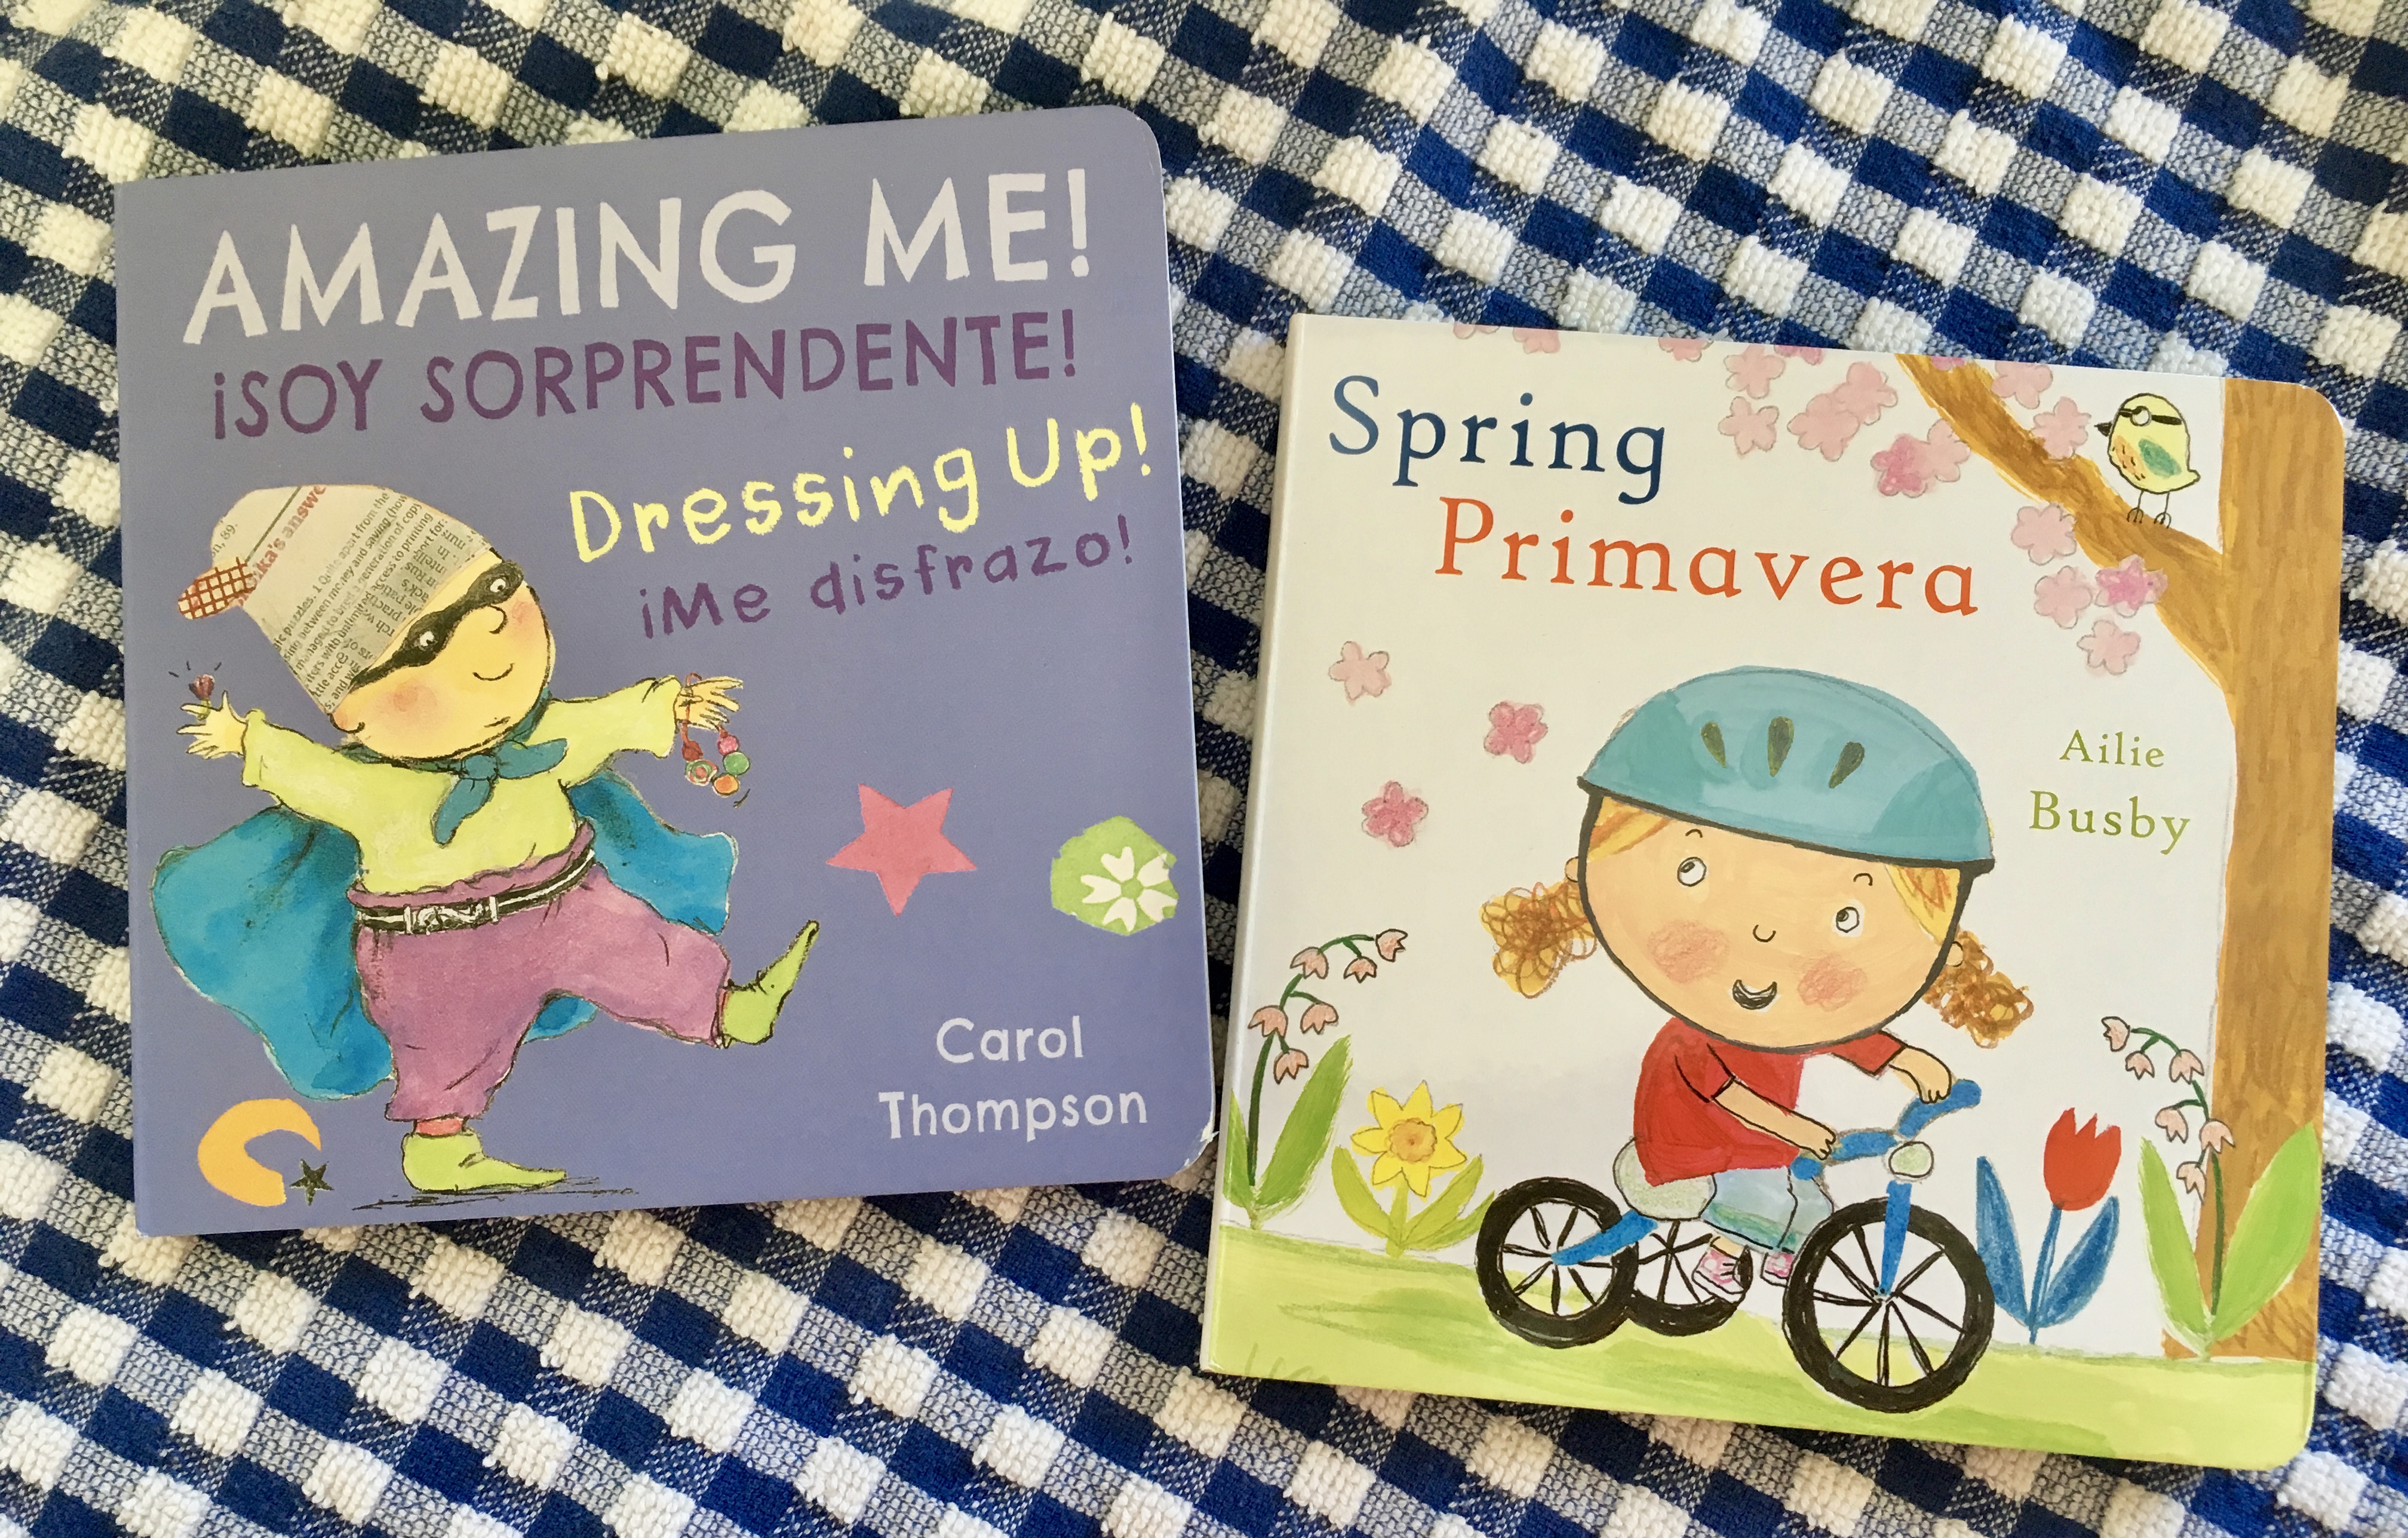 Spring/Primaver and Amazing Me Dressing Up covers